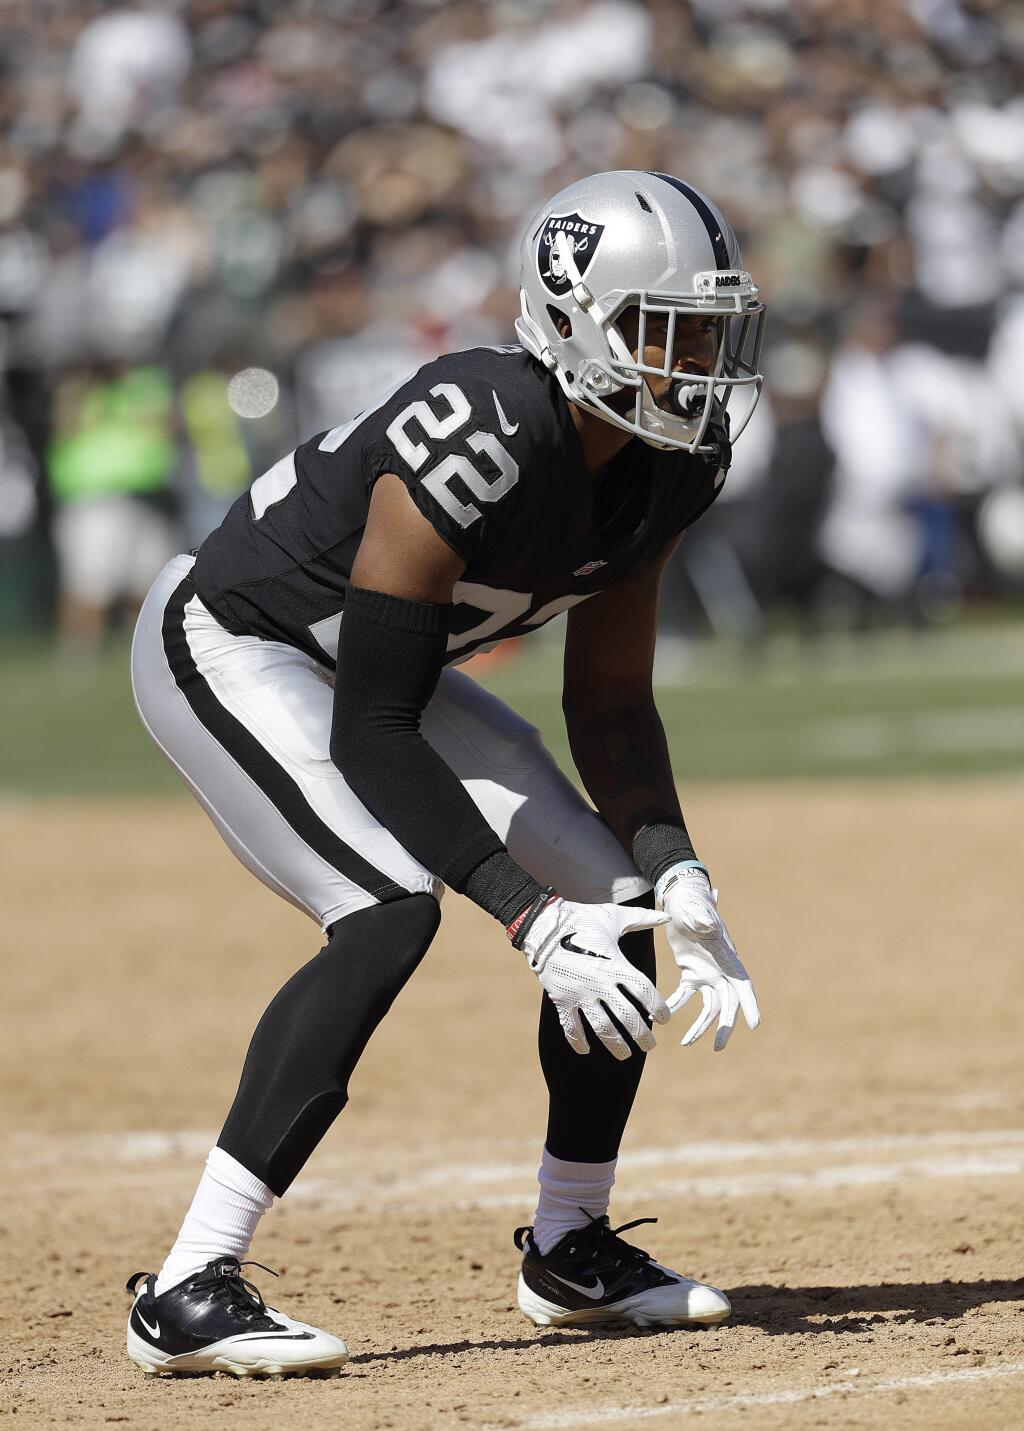 In this Sept. 17, 2017, file photo, Oakland Raiders cornerback Gareon Conley readies for a play by the New York Jets during the second half in Oakland. With top two picks Conley and Obi Melifonwu missing most of their rookie seasons with injuries and a group of defensive tackles taken in recent years failing to bolster a lacking interior pass rush, the Raiders have struggled all season defensively. (AP Photo/Marcio Jose Sanchez, File)